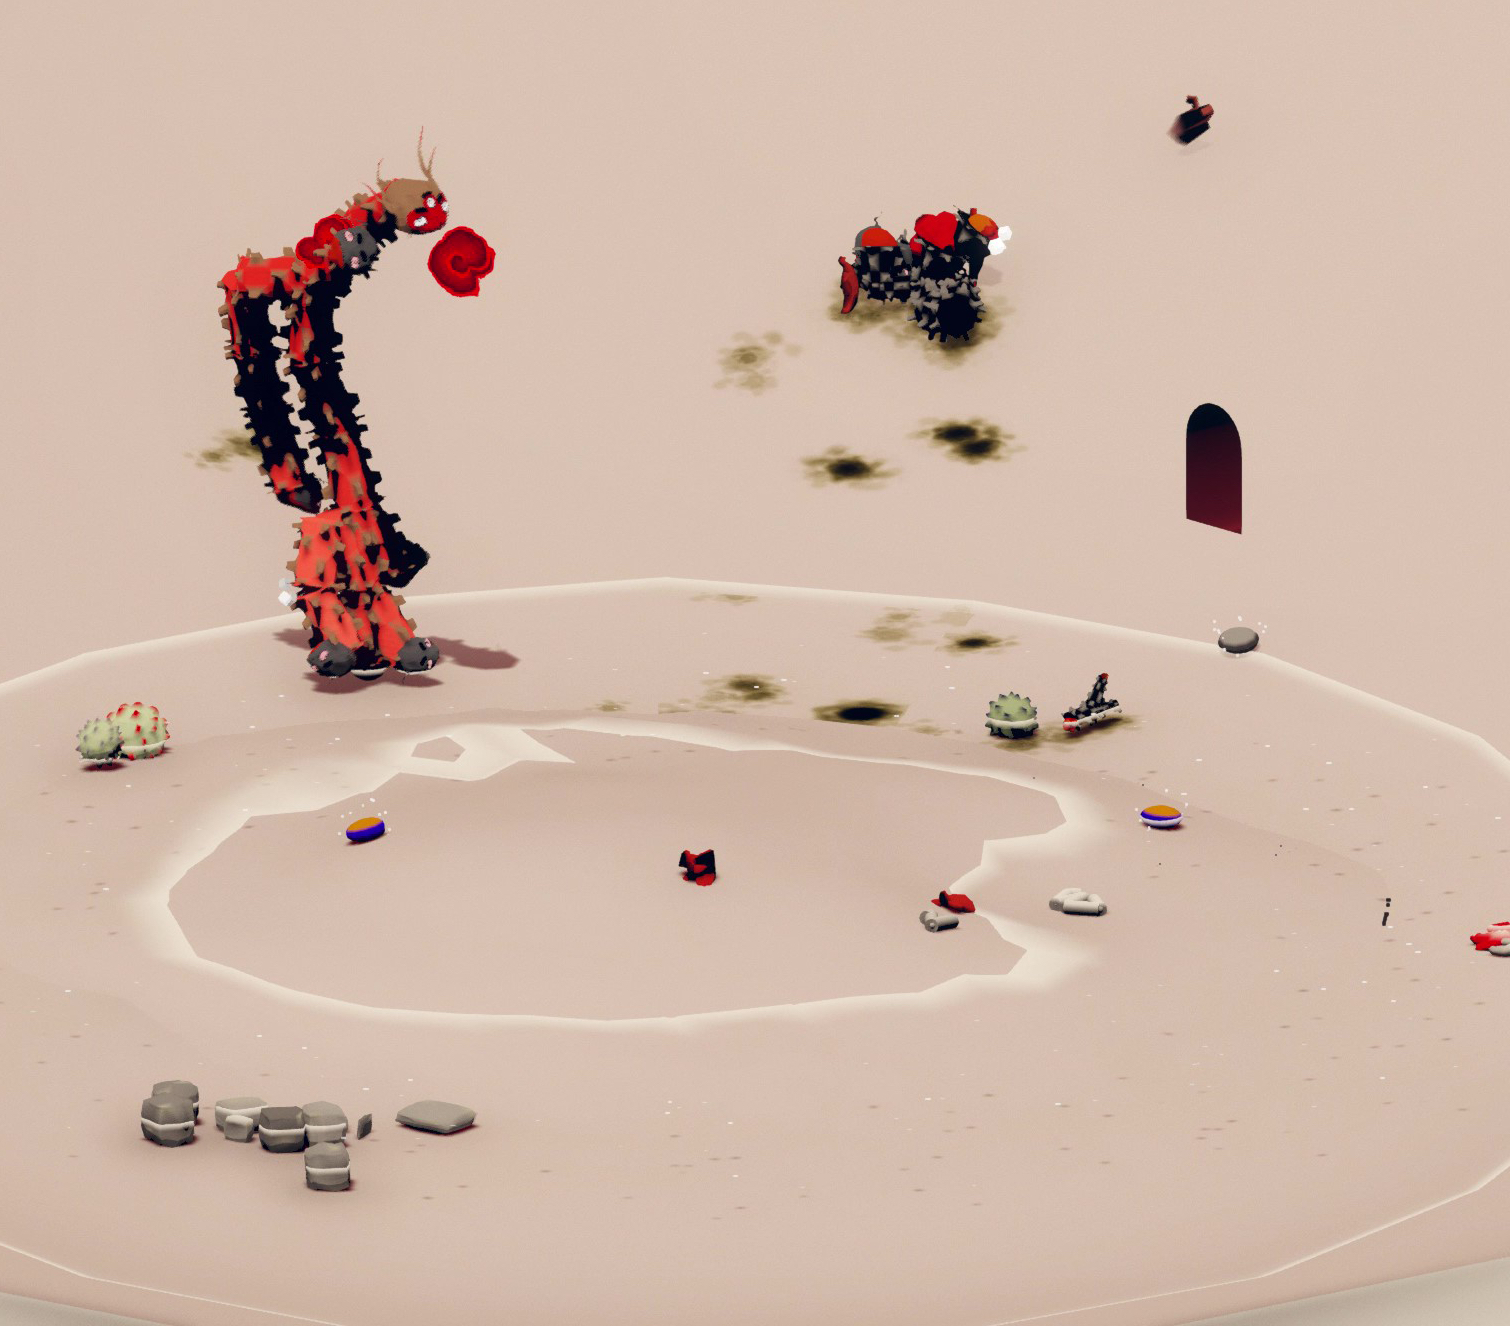 A still image from a digital animation showing a strange biomorphic creature surrounded by scraps of unidentifiable objects against a greige background